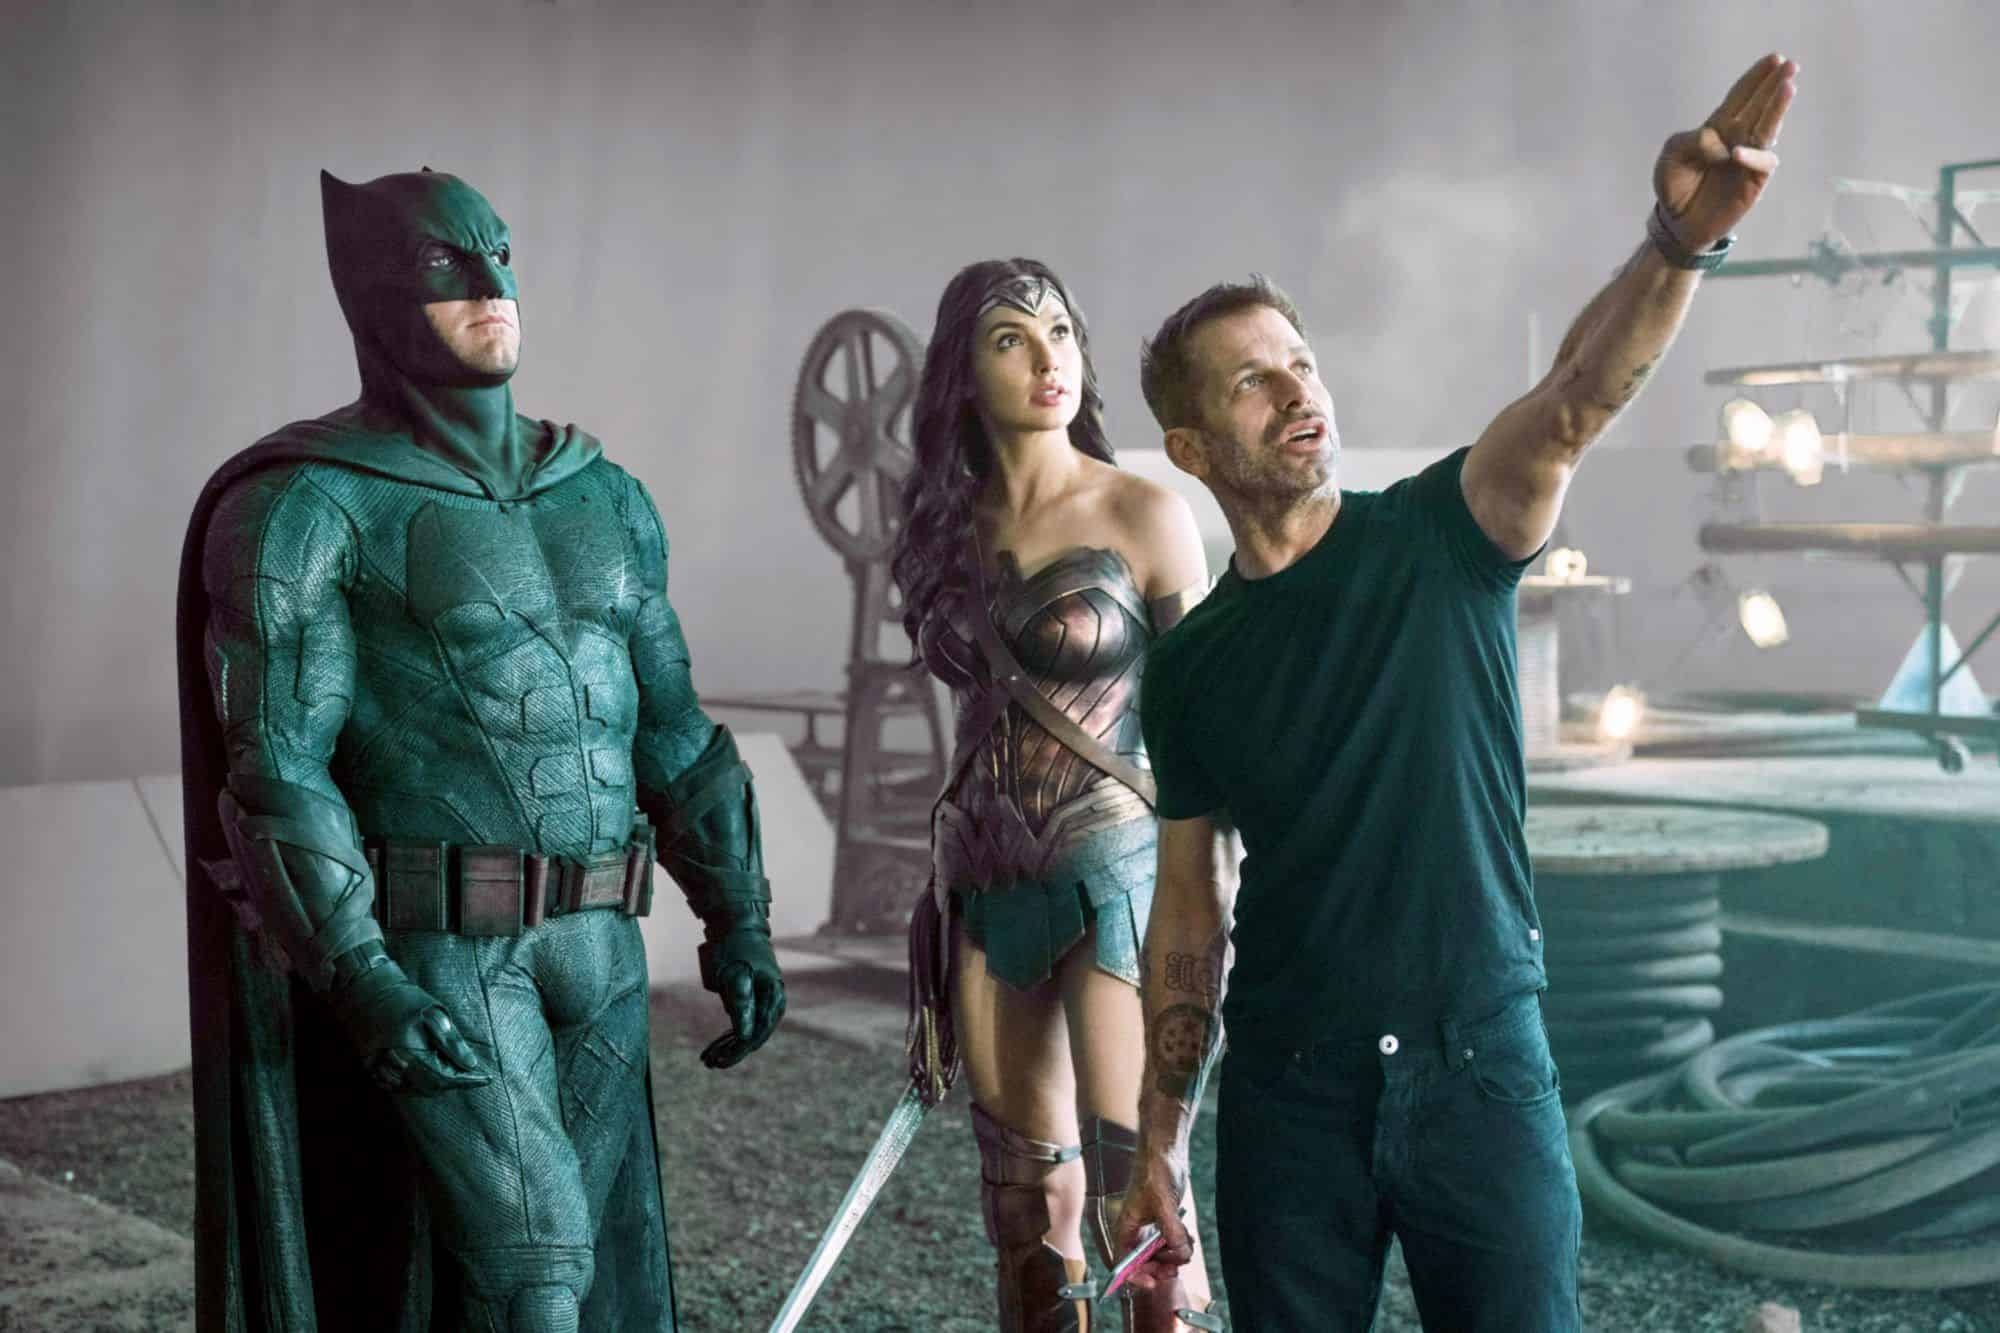 Batman (Ben Affleck), Wonder Woman (Gal Gadot) being directed by Zack Snyder in Justice League